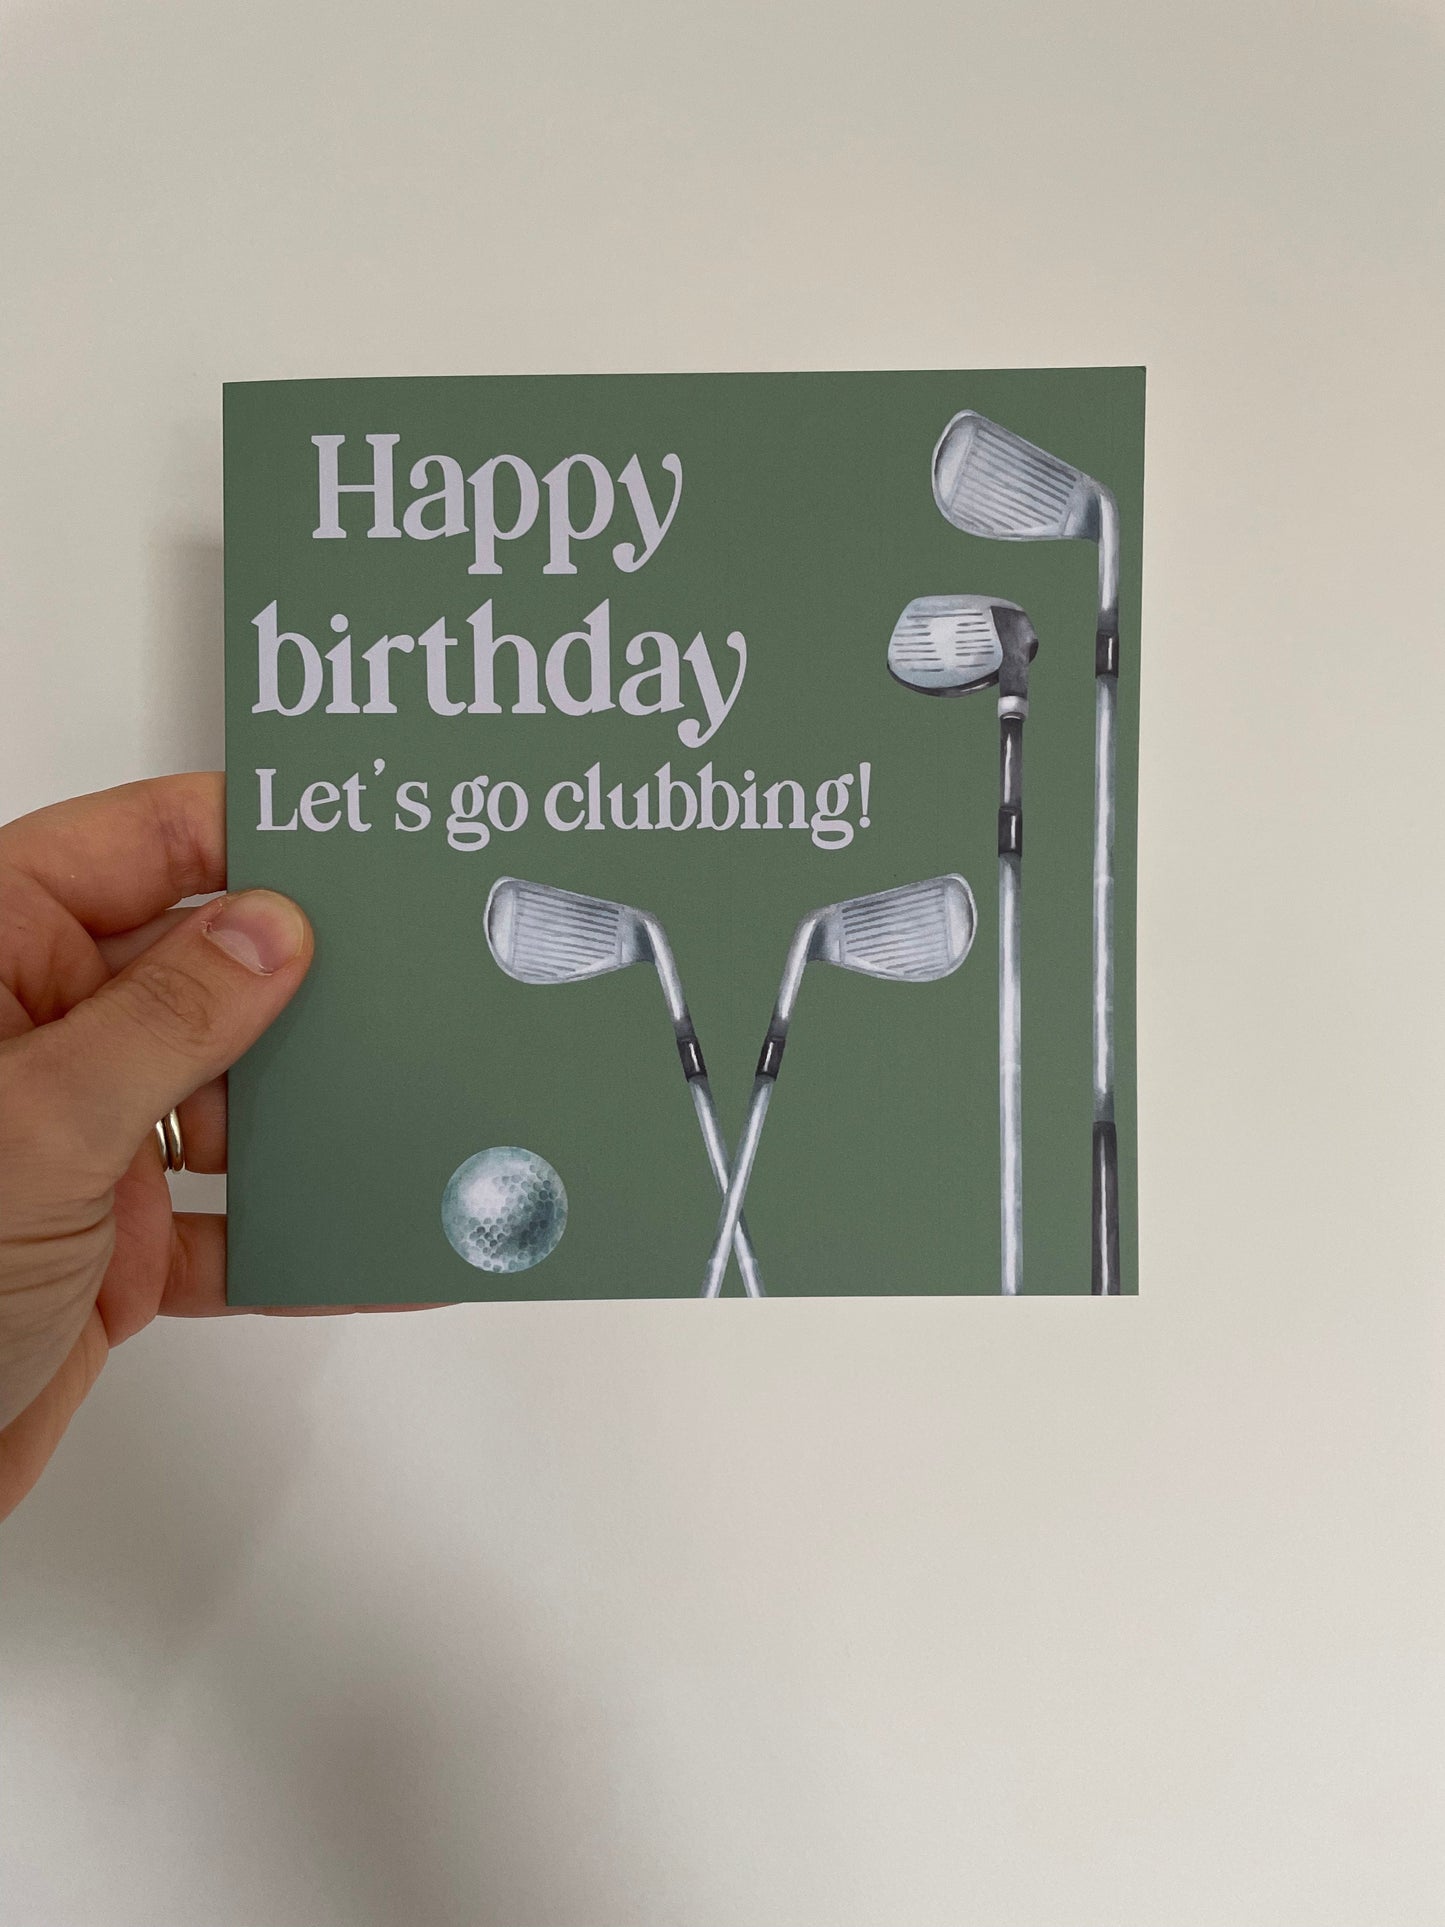 Golf “let’s go clubbing” birthday card Cards And Hope Designs   